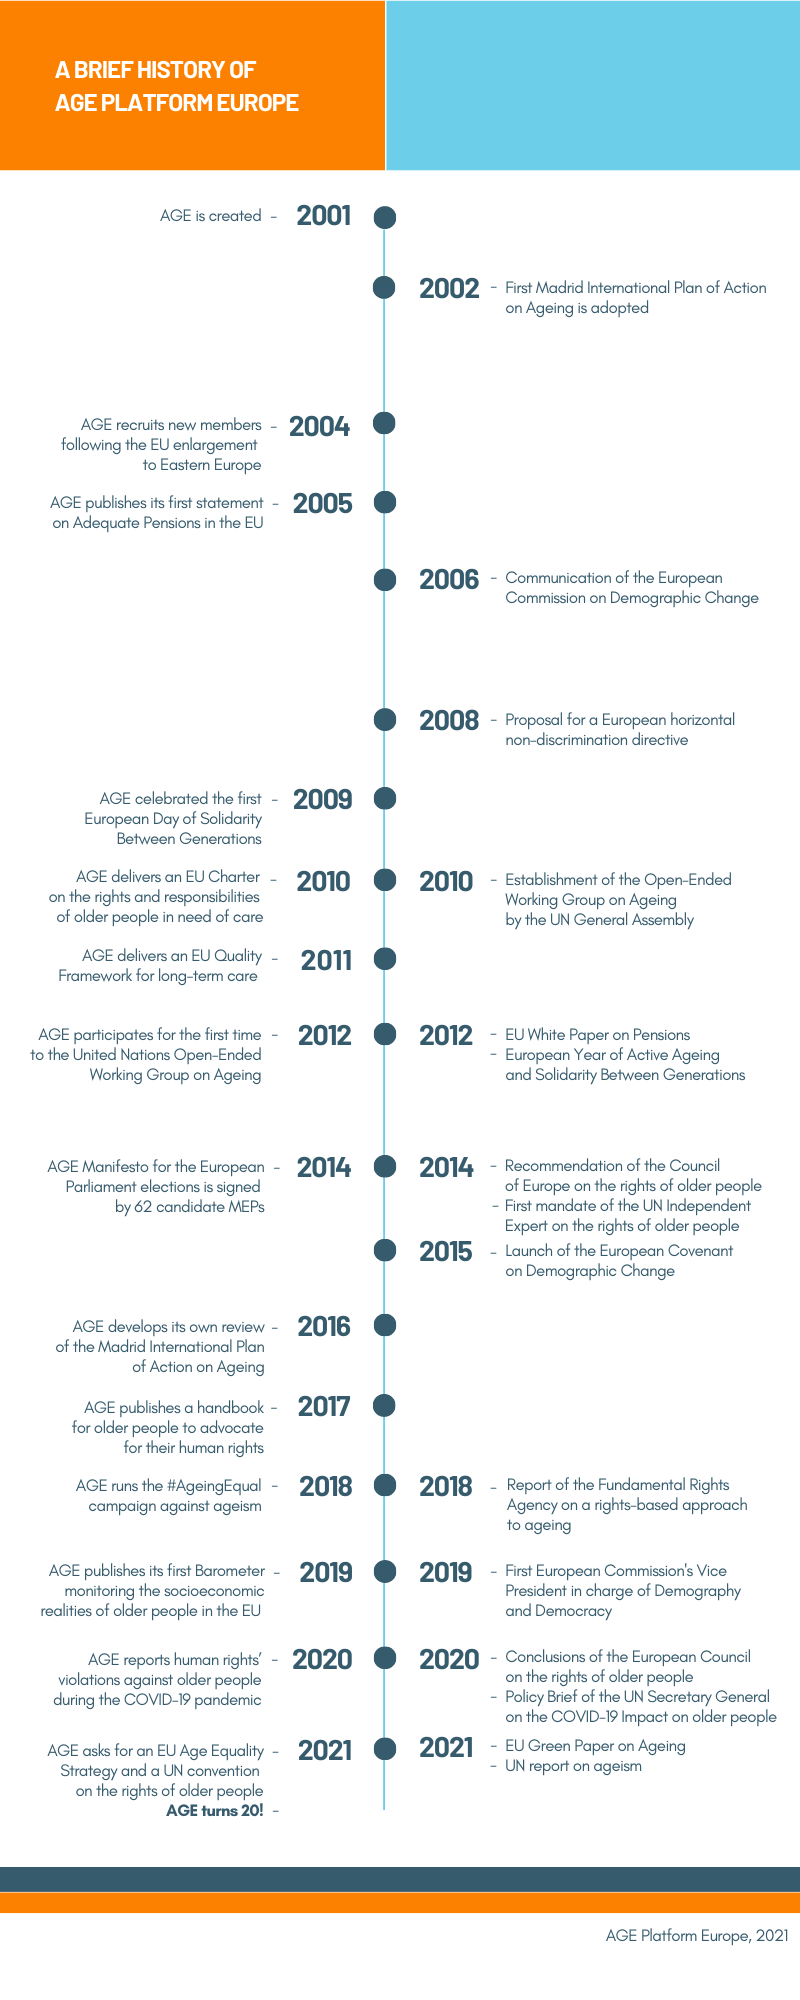 Timeline of AGE's achievements from 2001 to 2021